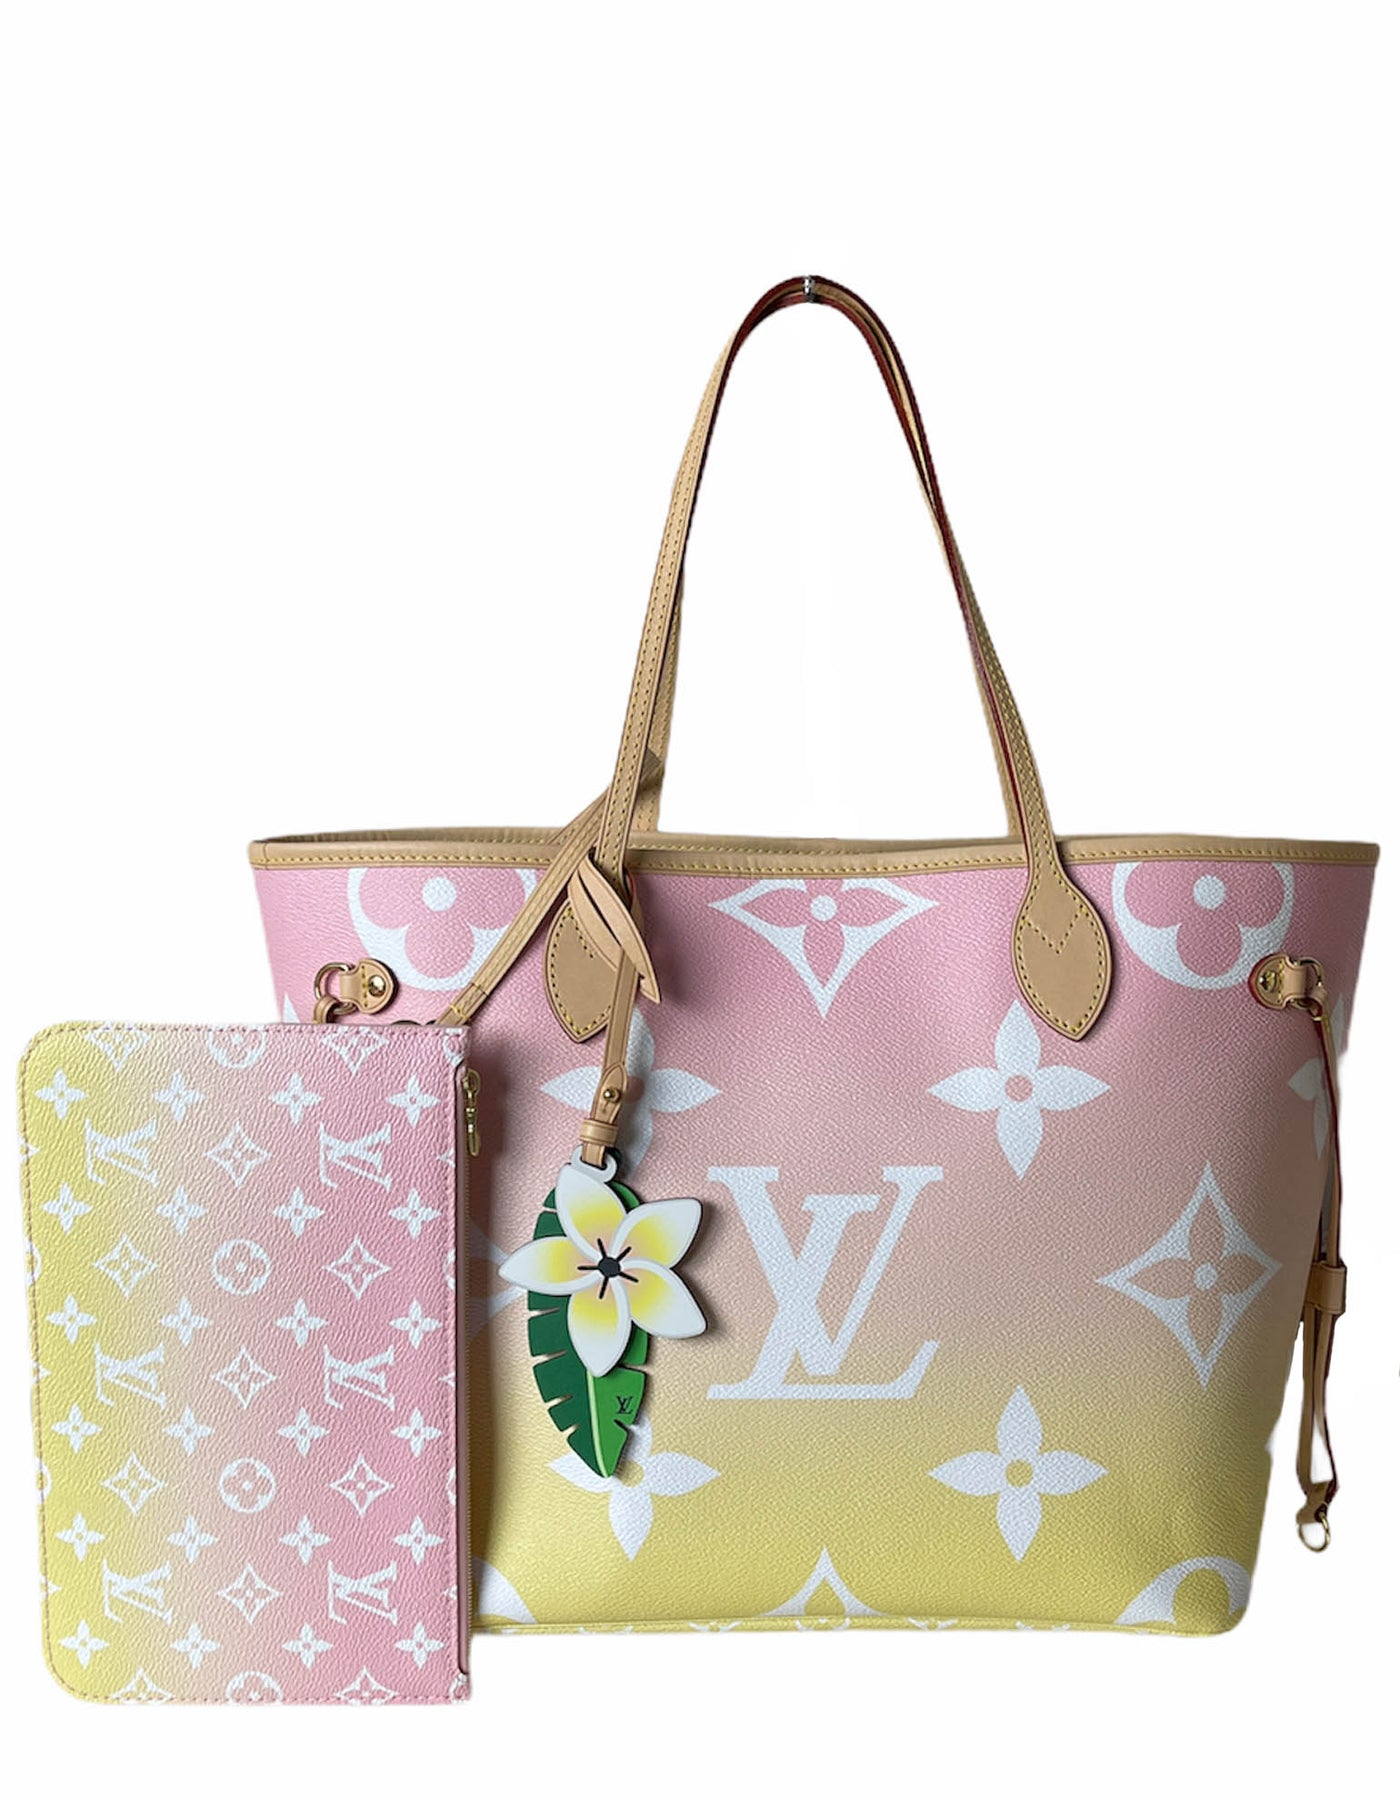 Monogram Neverfull MM with the light pink lining